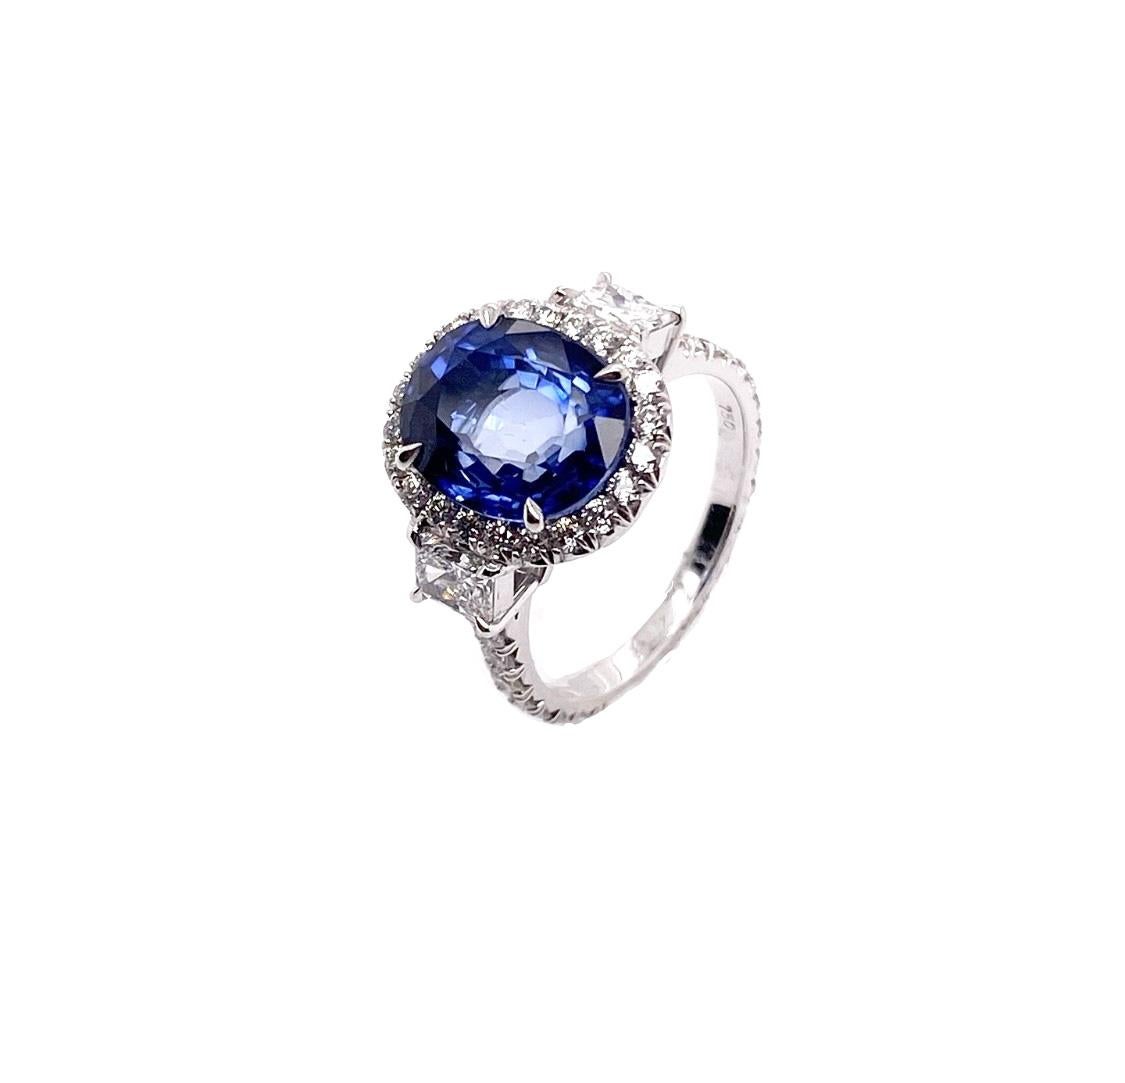 This unique and luxurious ring makes a statement with 5.92 carat oval shaped blue sapphire that is complemented by the brilliant round cut diamonds in an oval halo fashion. The blue colored gemstone and diamonds set on a remarkably stunning in 18K